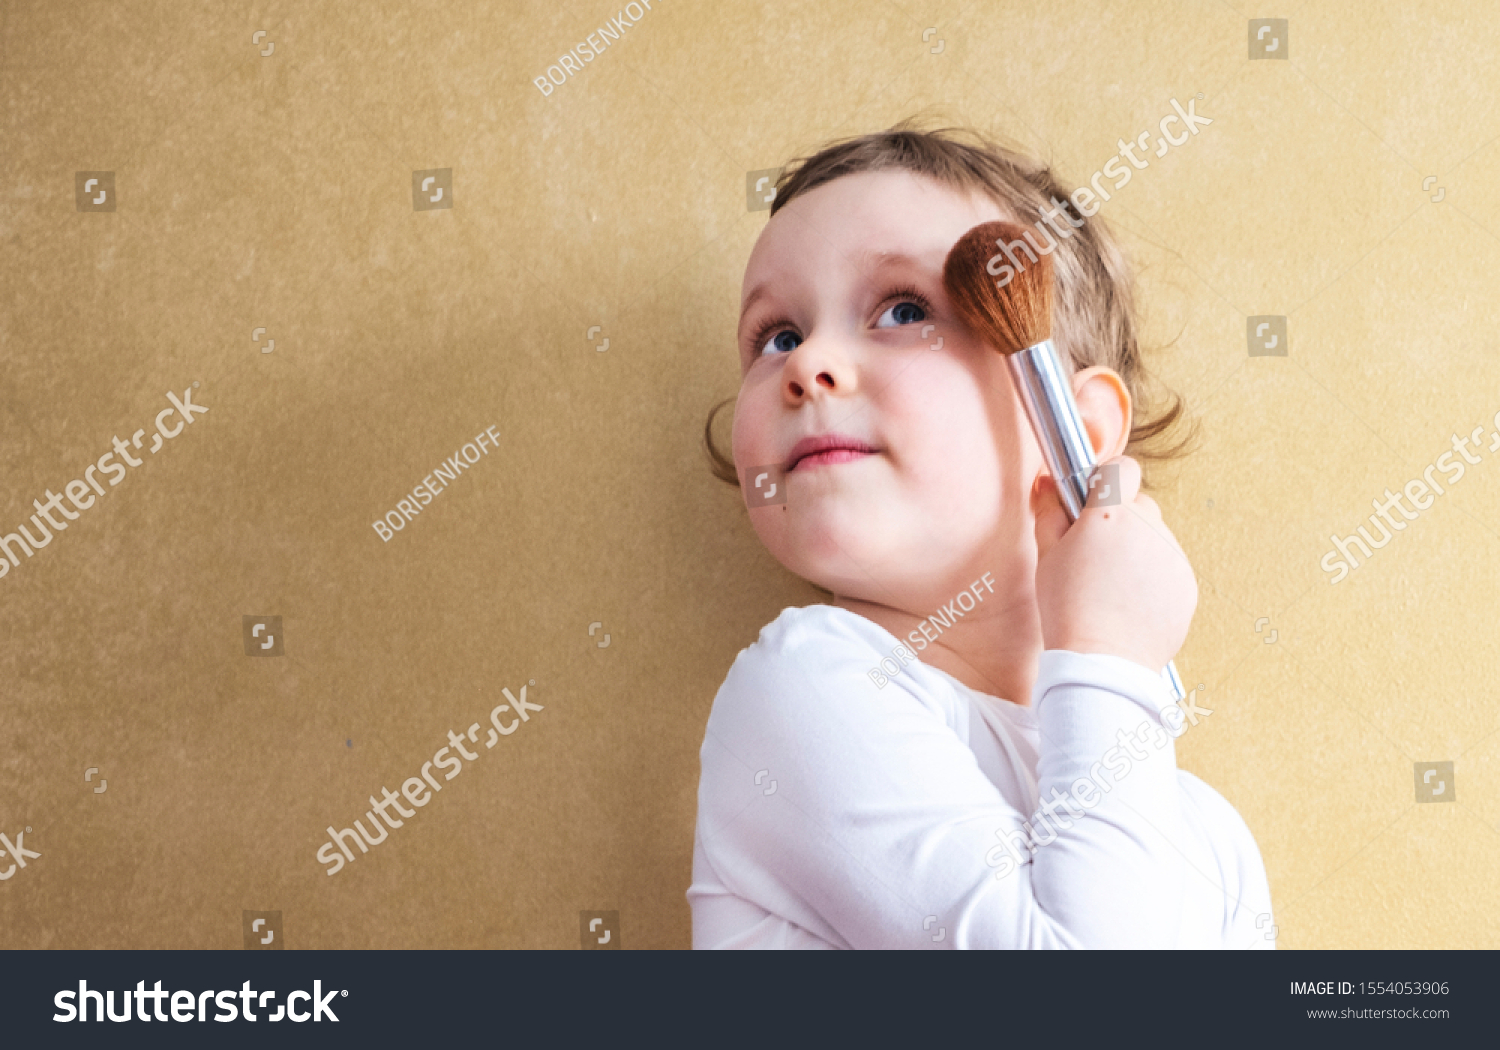 The child, a little girl of 4 years old, does makeup, imitates adults. A blonde with short hair in a white T-shirt holds a makeup brush in her hand. Orange wall and place to feast #1554053906